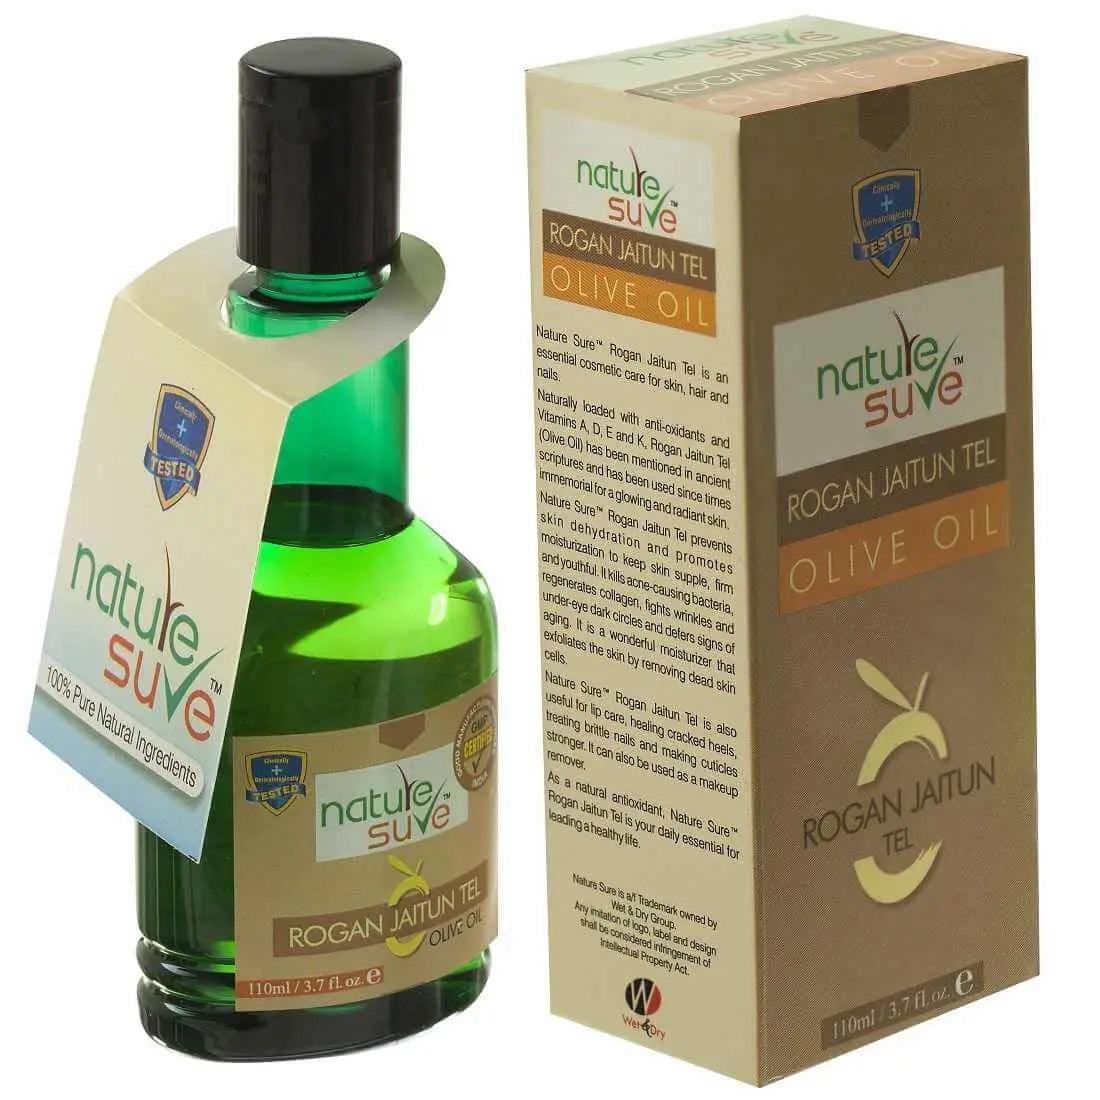 Nature Sure Rogan Jaitun Tail (Olive Oil) for Skin, Hair and Nail Care in Men & Women - 110ml 8908003648026